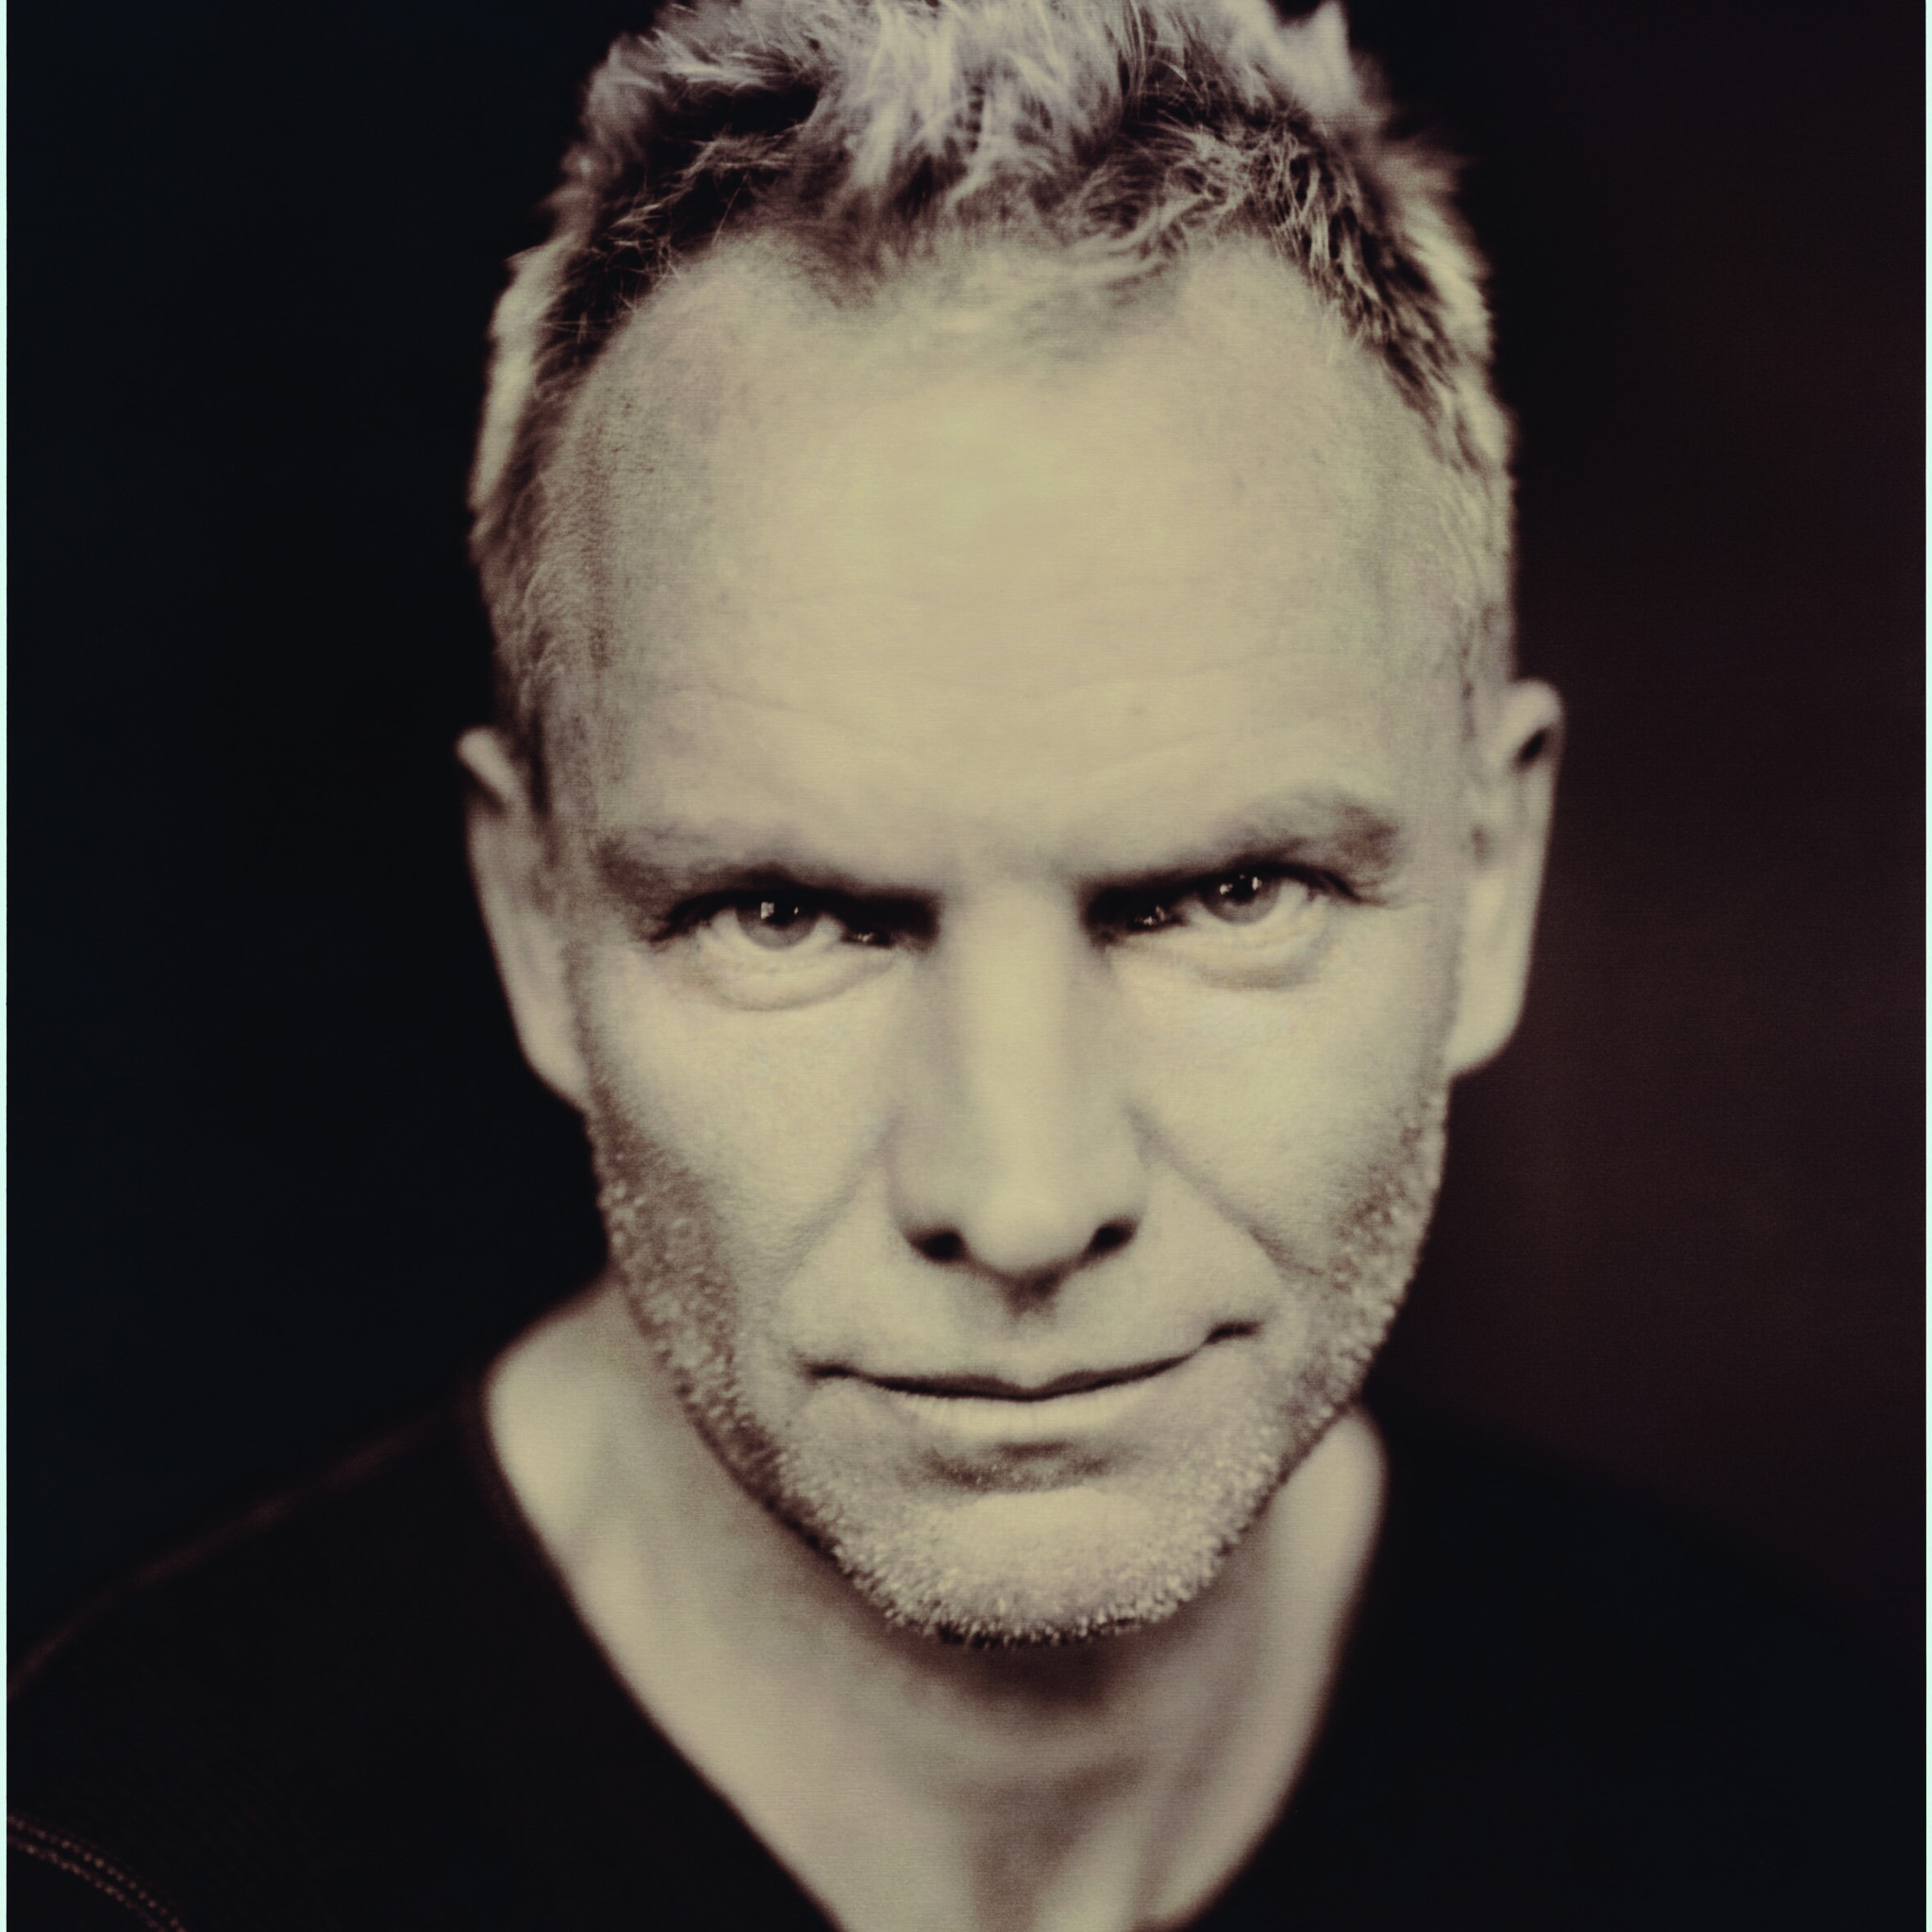 sting_paolorovers_26062003_.jpg